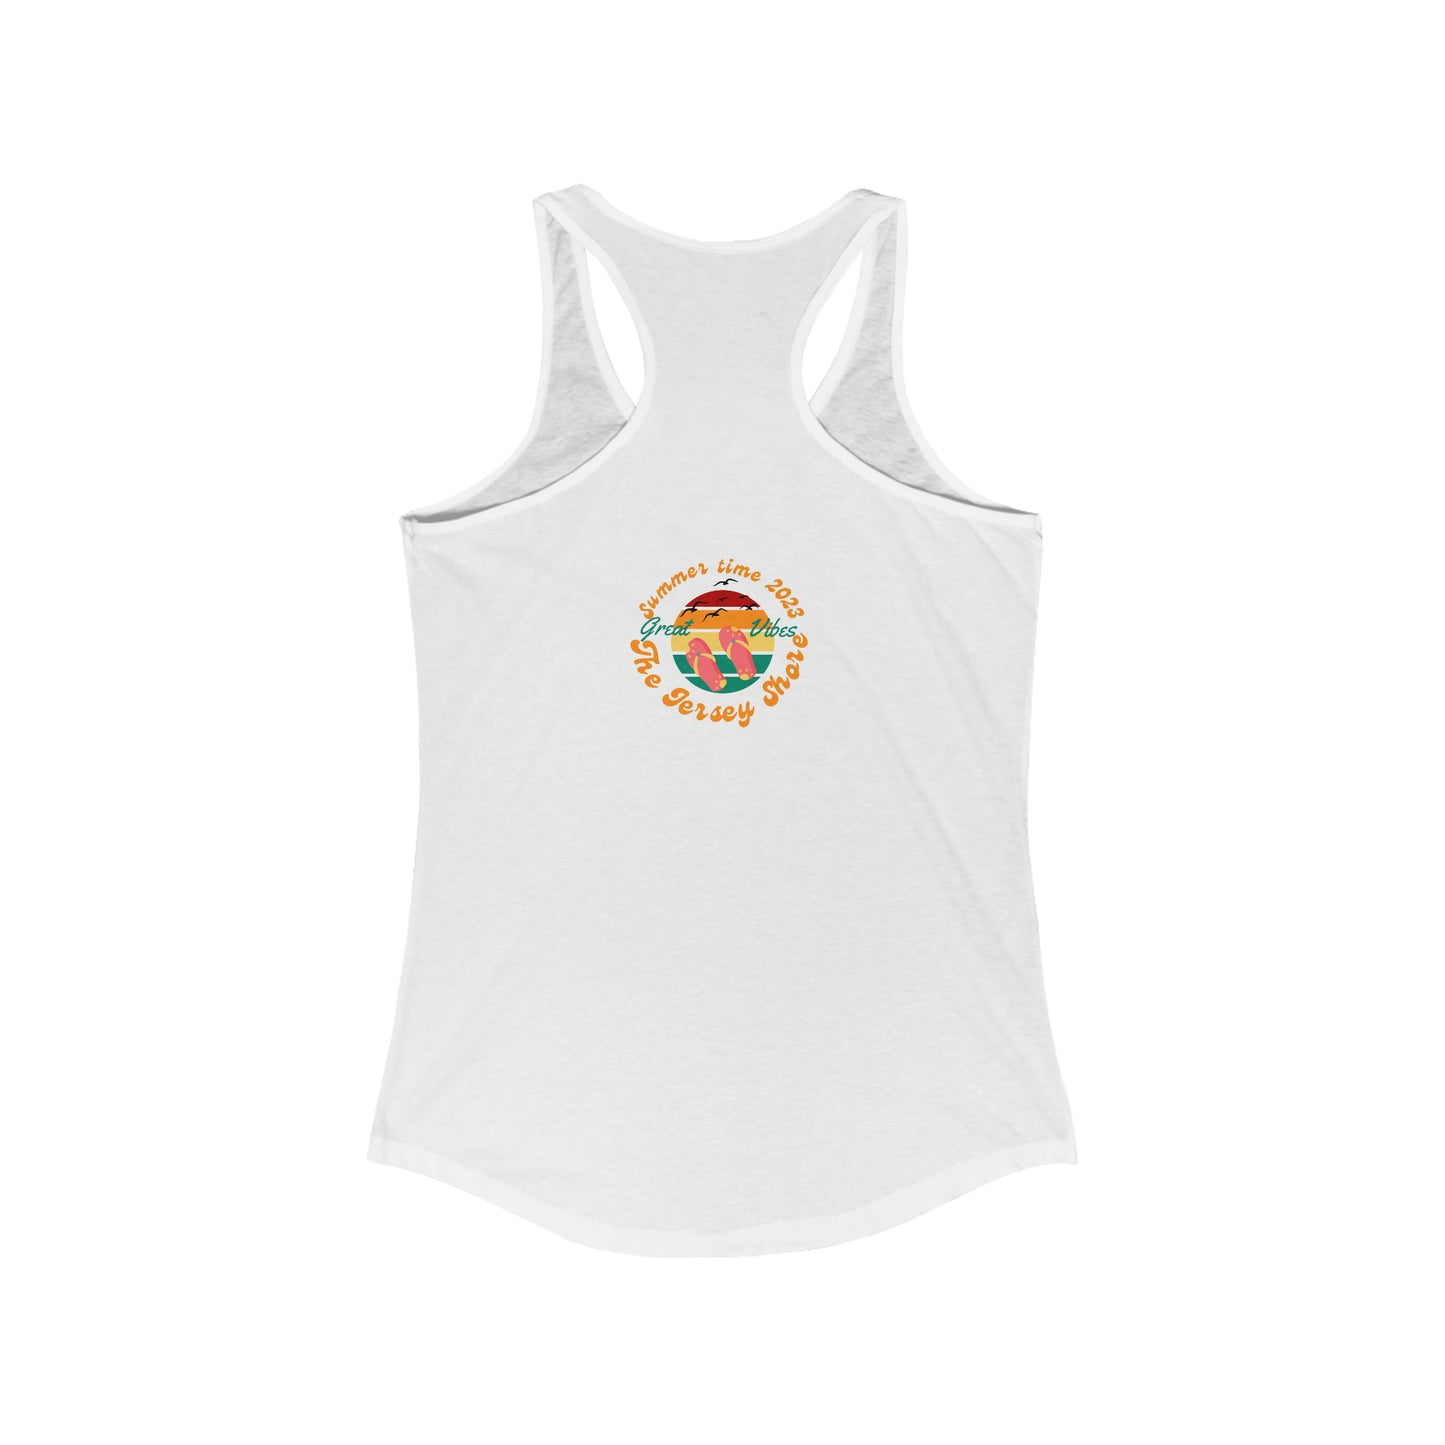 ‘Summer Vibes. Turn it out! Printed Front & Back.  Women's Ideal Racerback Tank